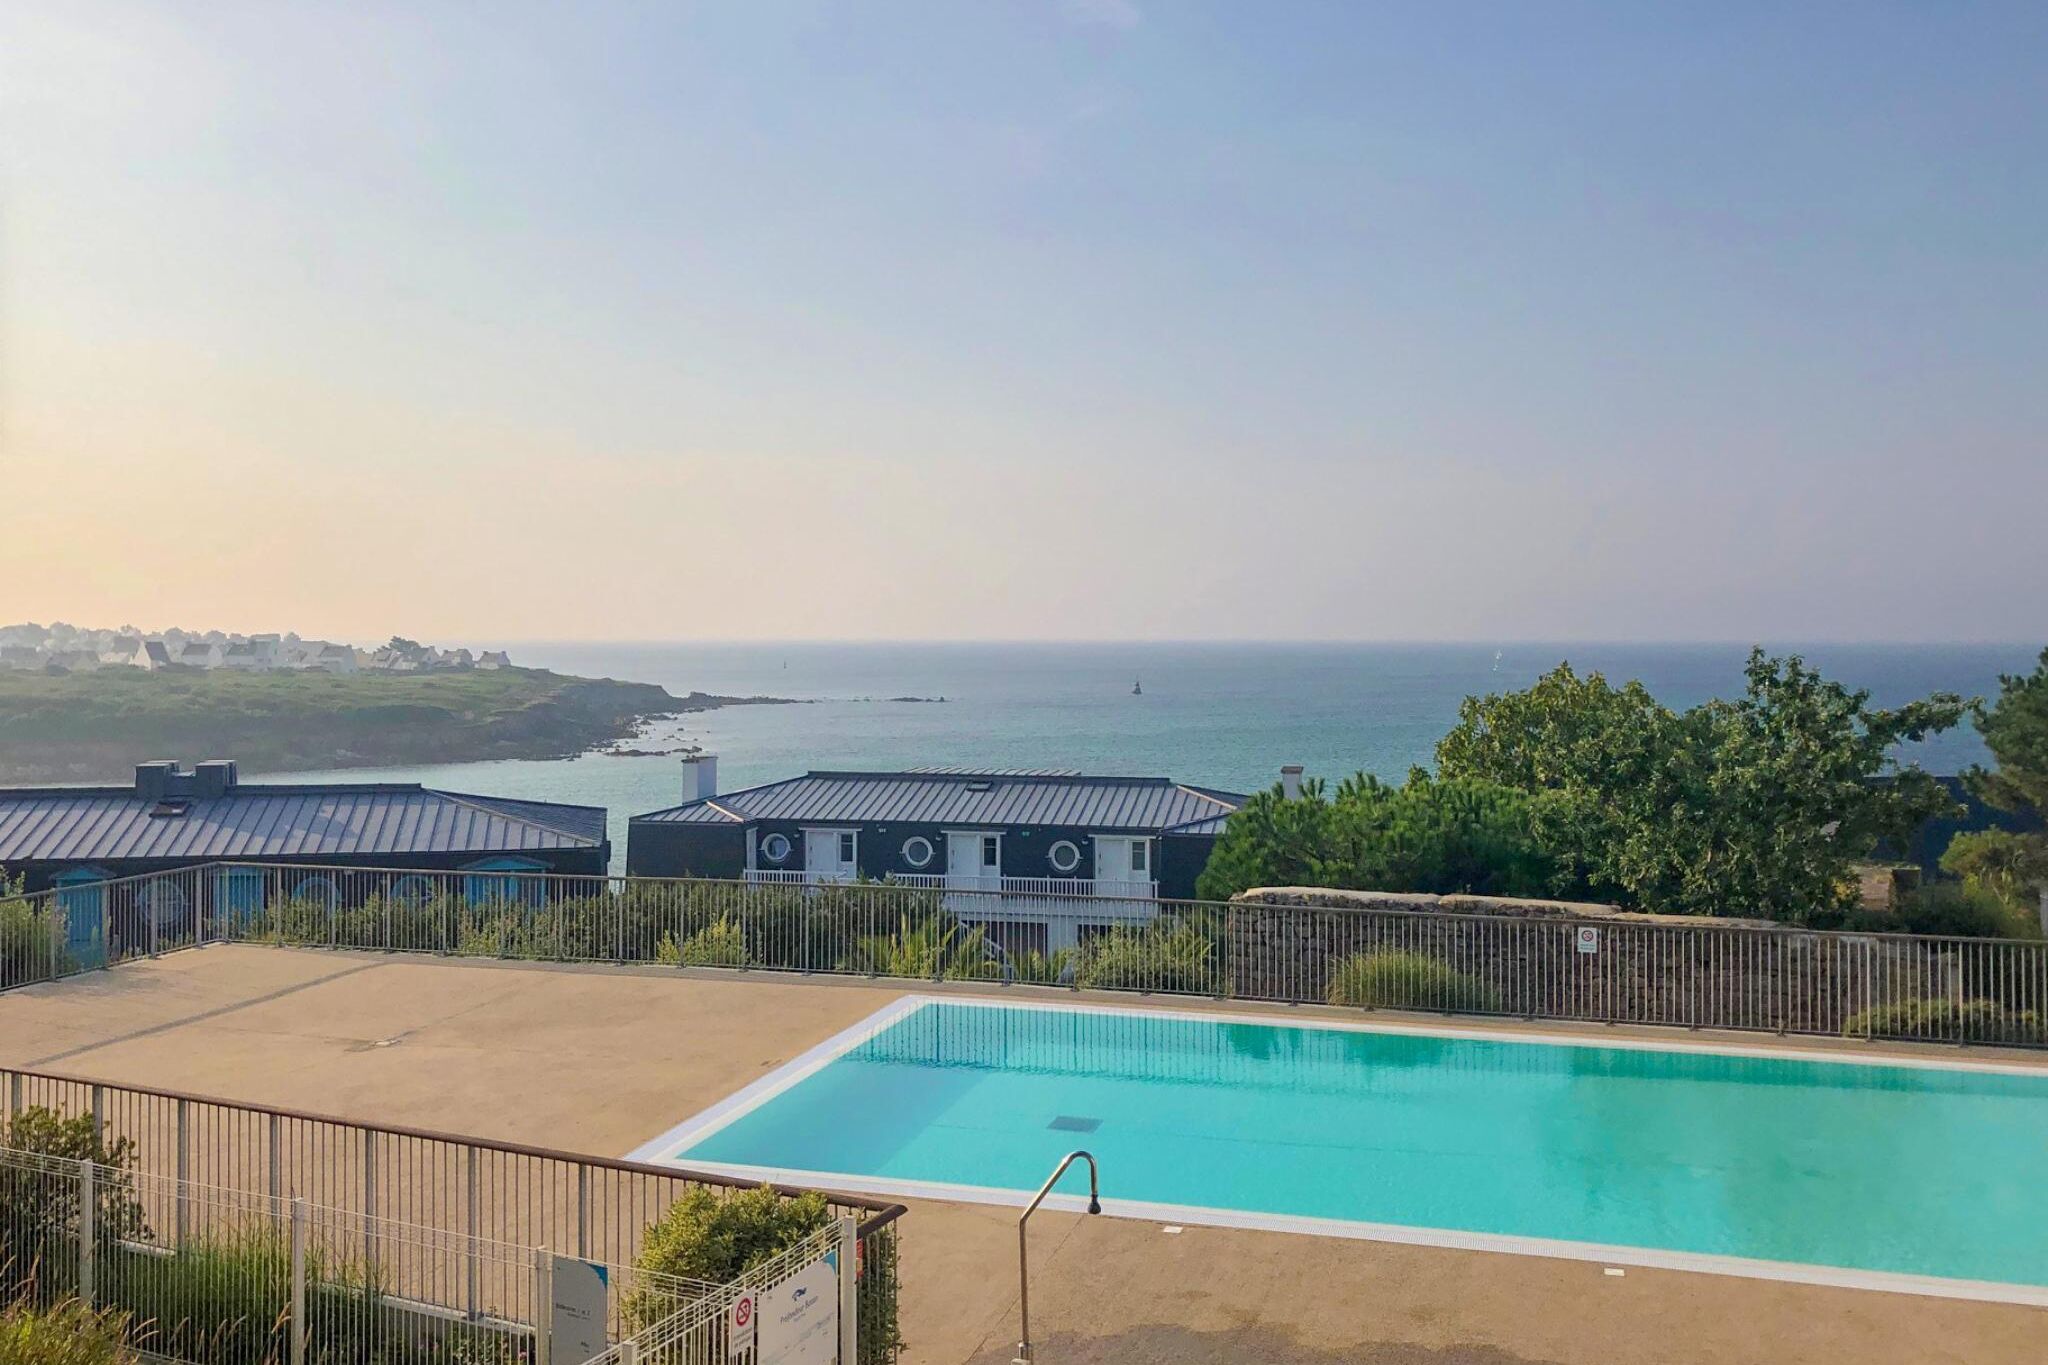 Apartment with pool and sea view in southwest Brittany